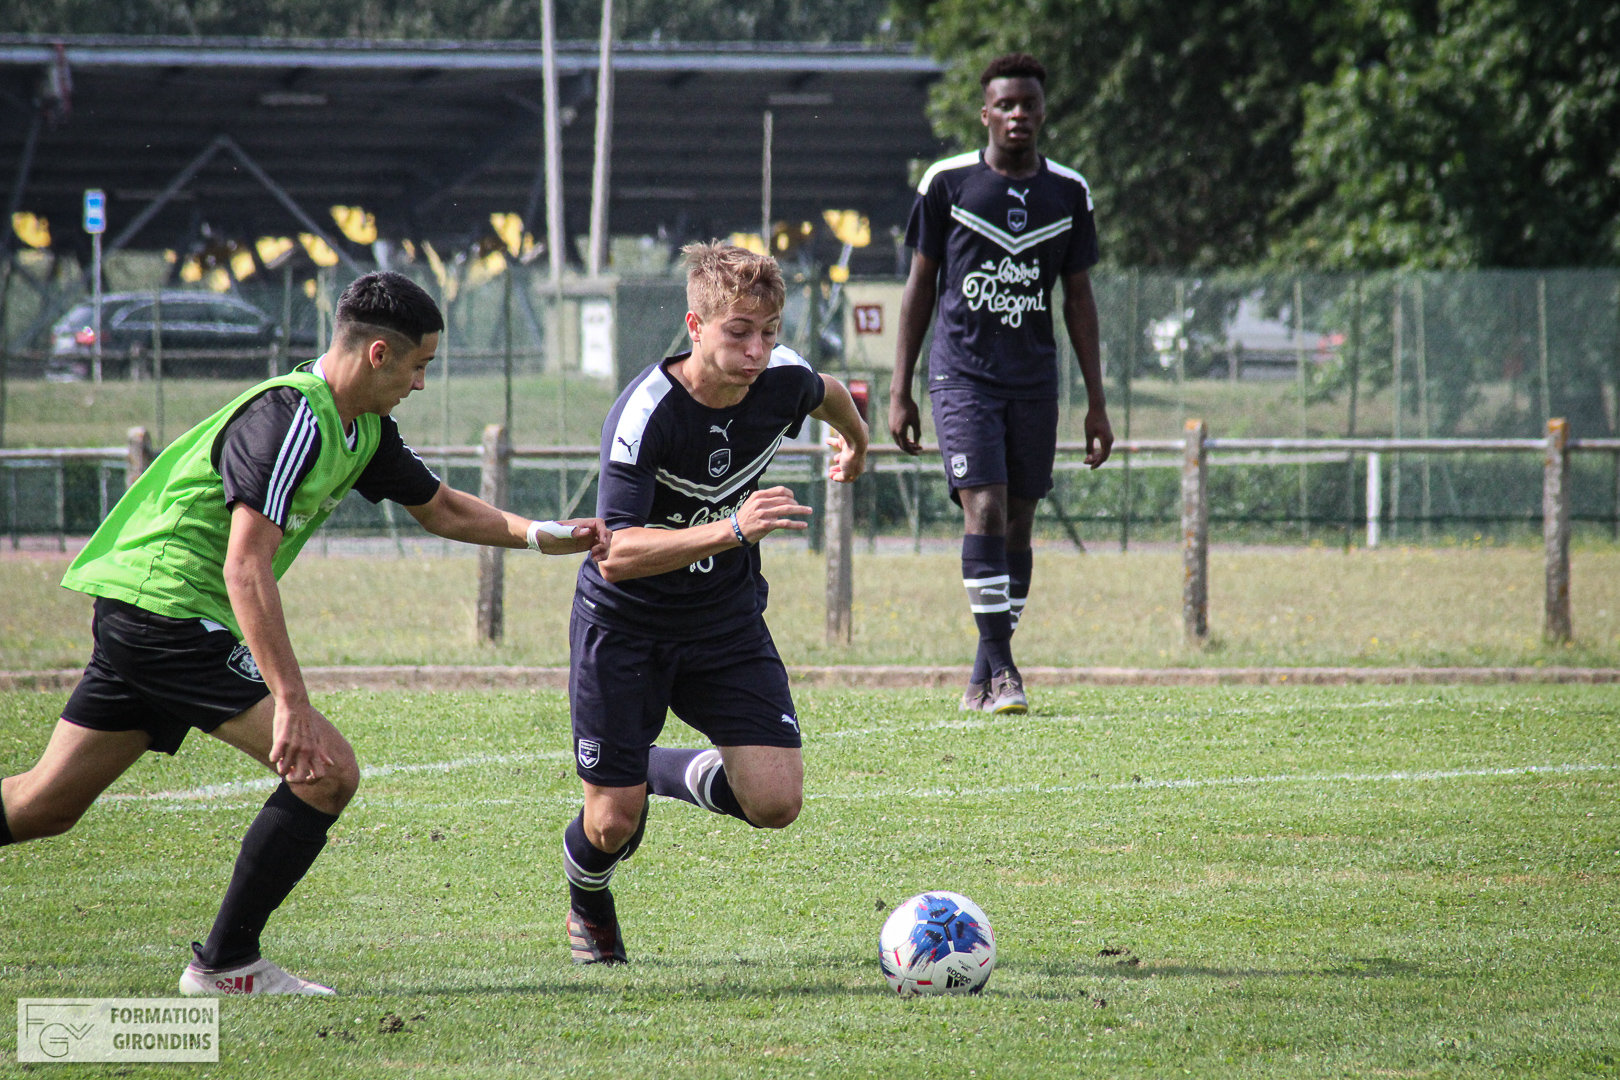 Cfa Girondins : Double confrontation amicale contre Toulouse - Formation Girondins 